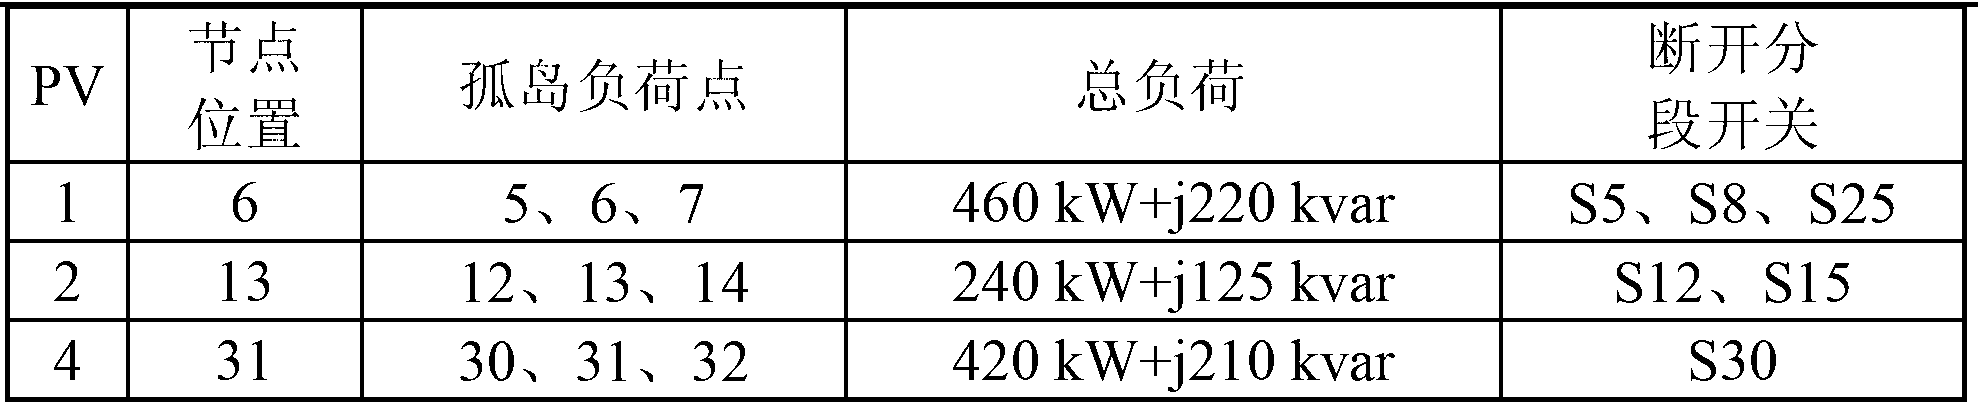 Power distribution network power supply power restoration method based on photovoltaic power generation system